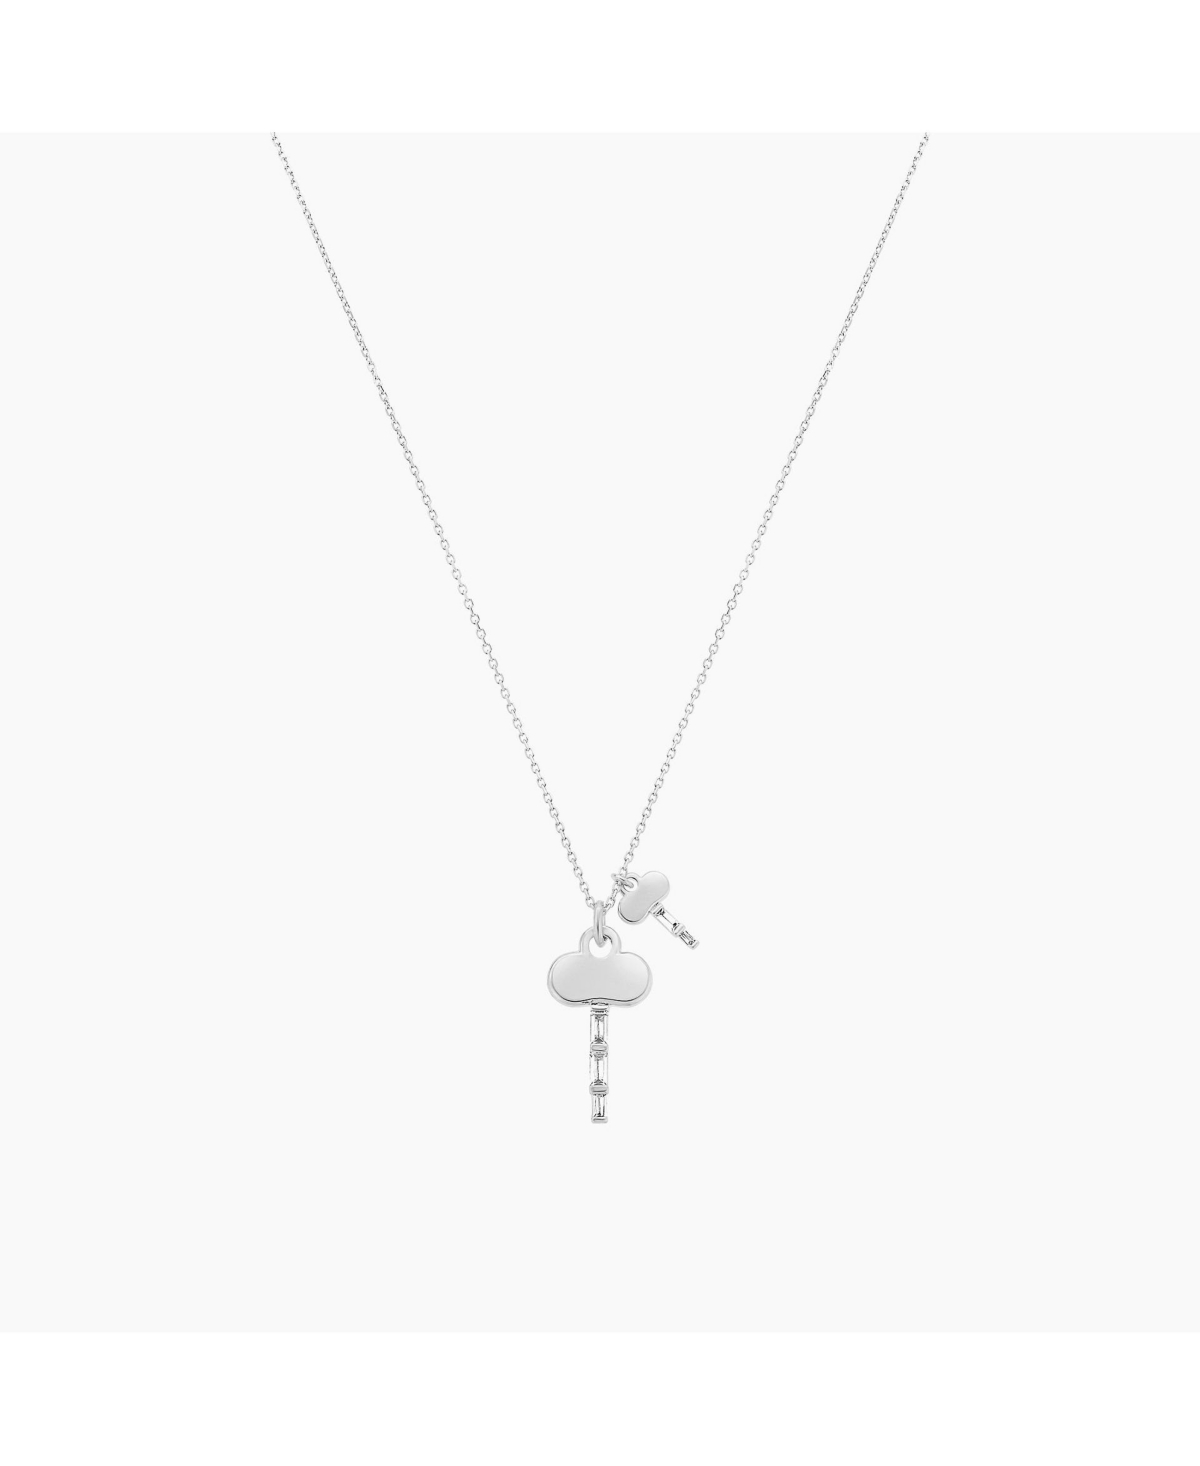 Kailyn Double Key Pendant Necklace - Silver